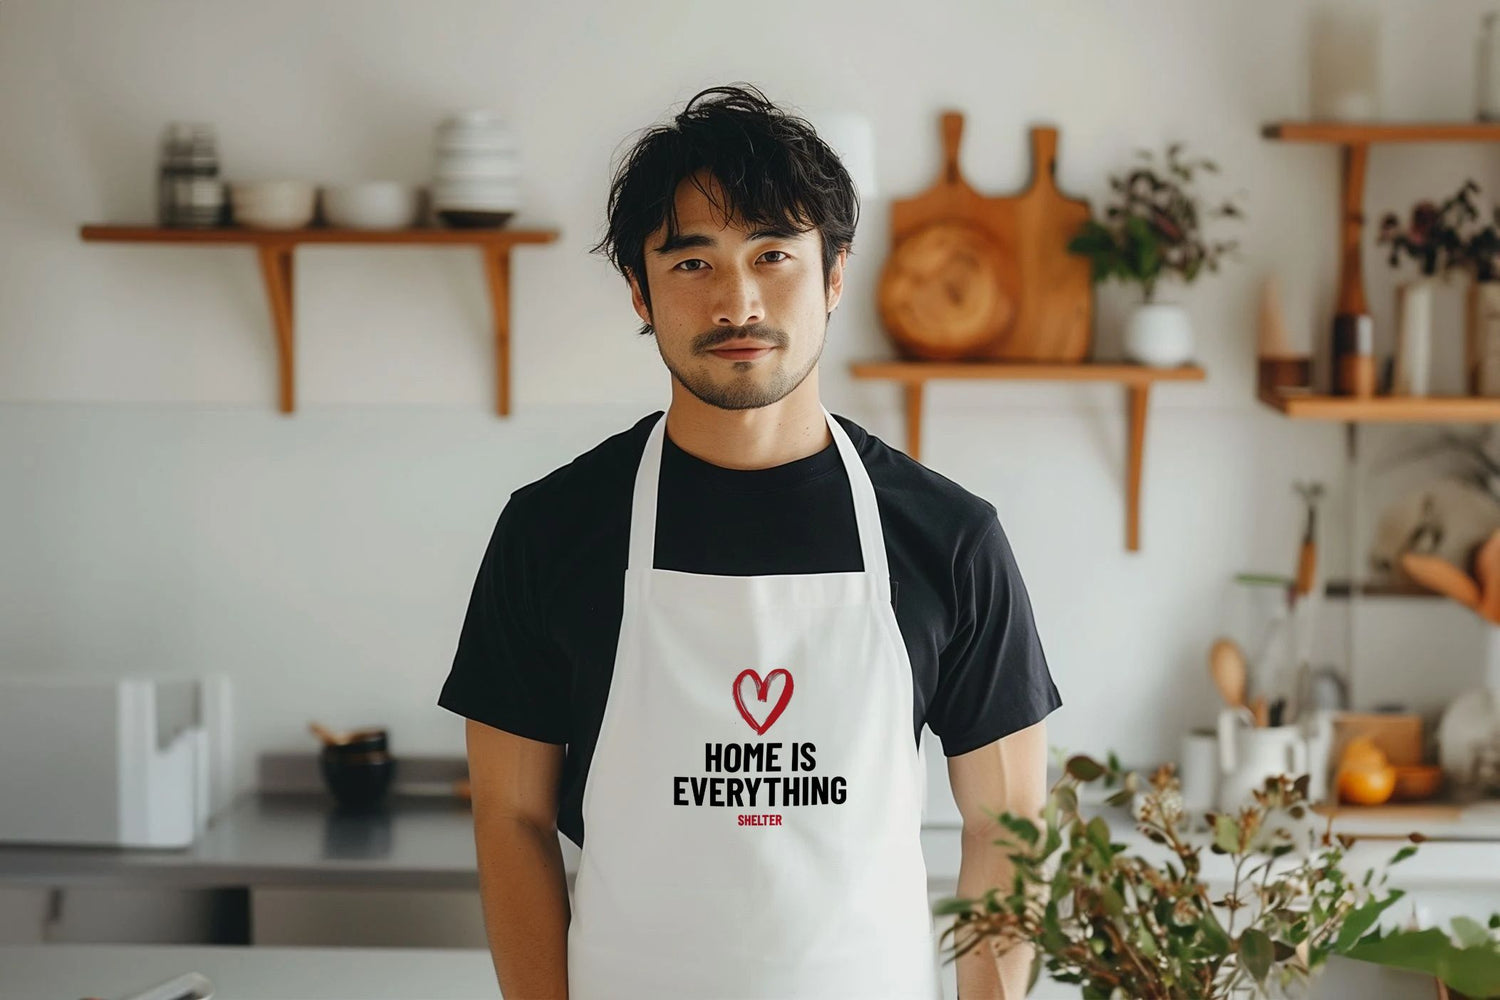 Man standing in a kitchen wearing a white apron with a red heart design above text which reads 'Home is Everything'